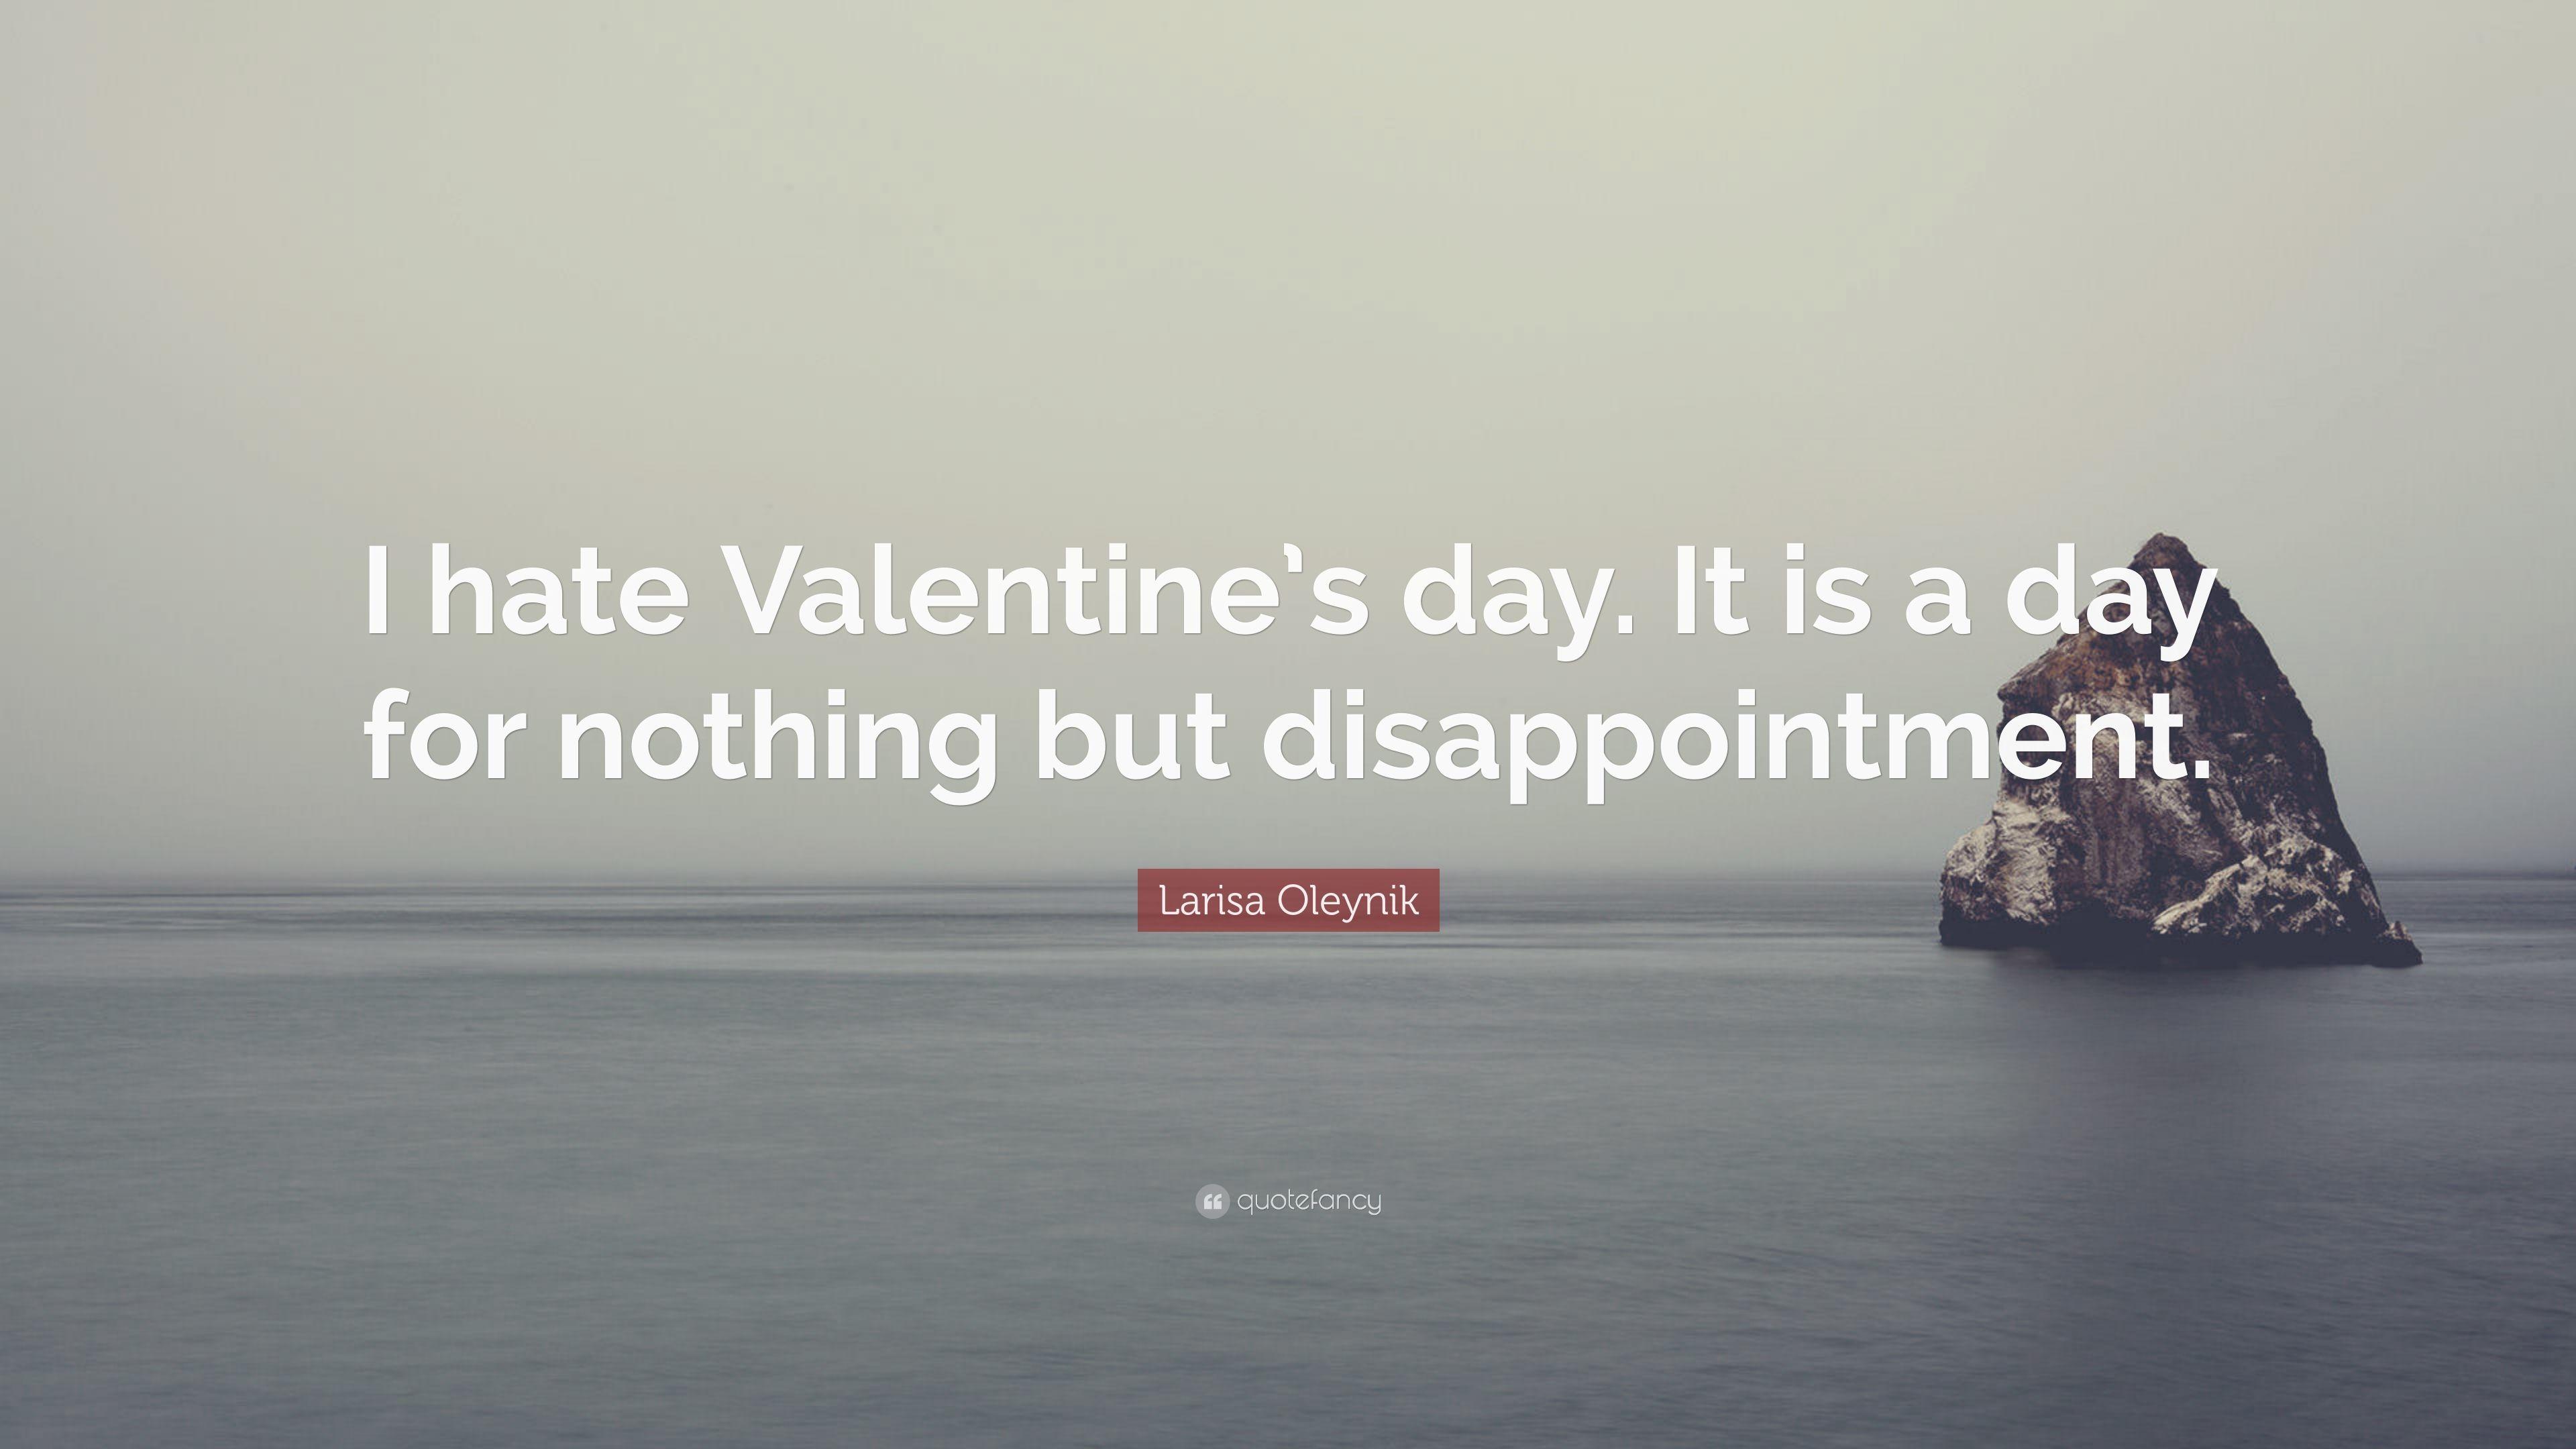 Larisa Oleynik Quote: “I hate Valentine's day. It is a day